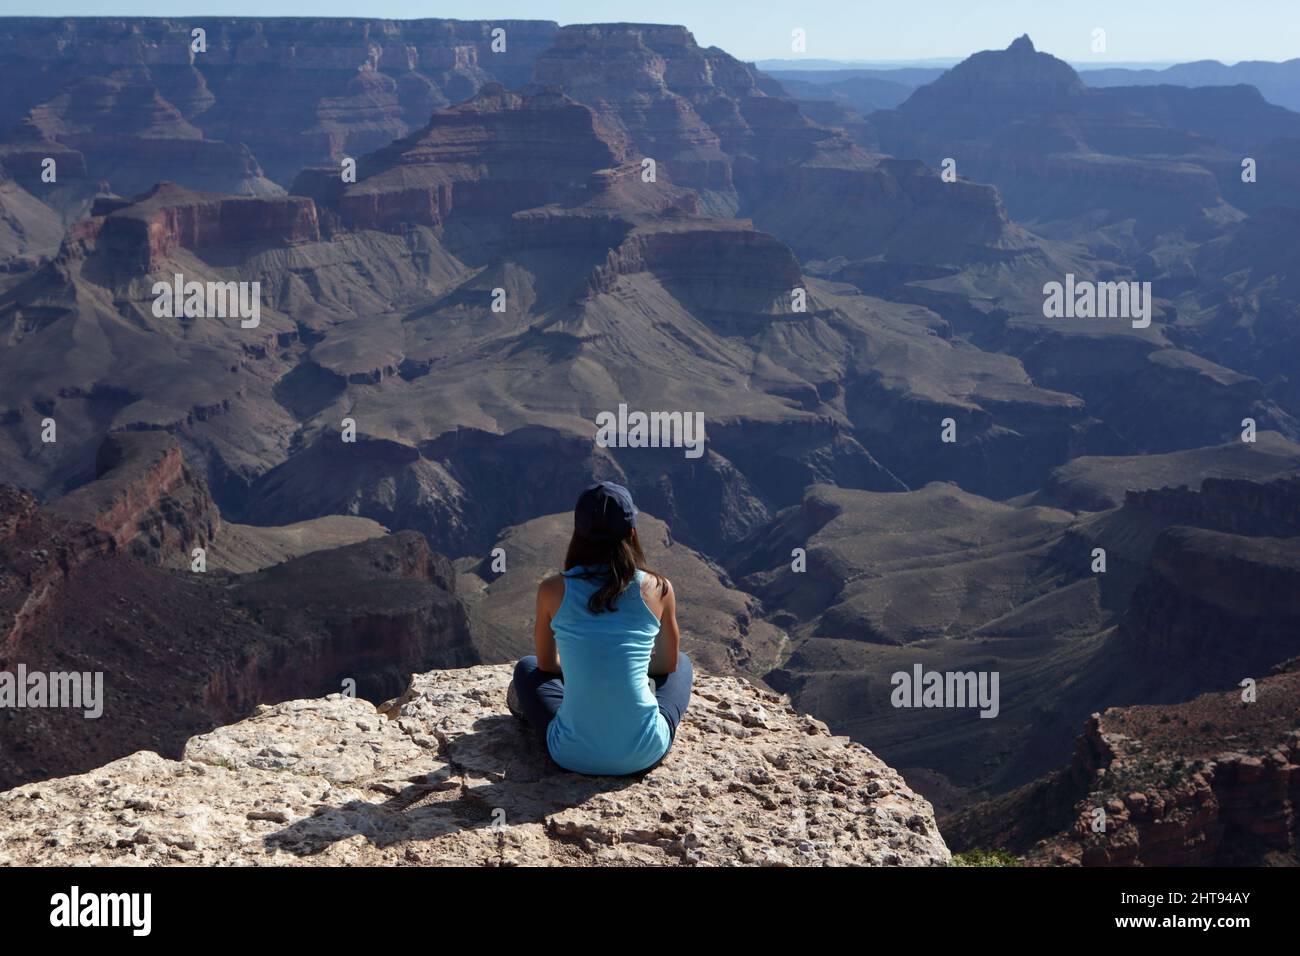 A girl sits cross-legged and looks at the view of cliffs, buttes, and rock layers, down in the depths of the Grand Canyon at Shoshone Point on the Sou Stock Photo